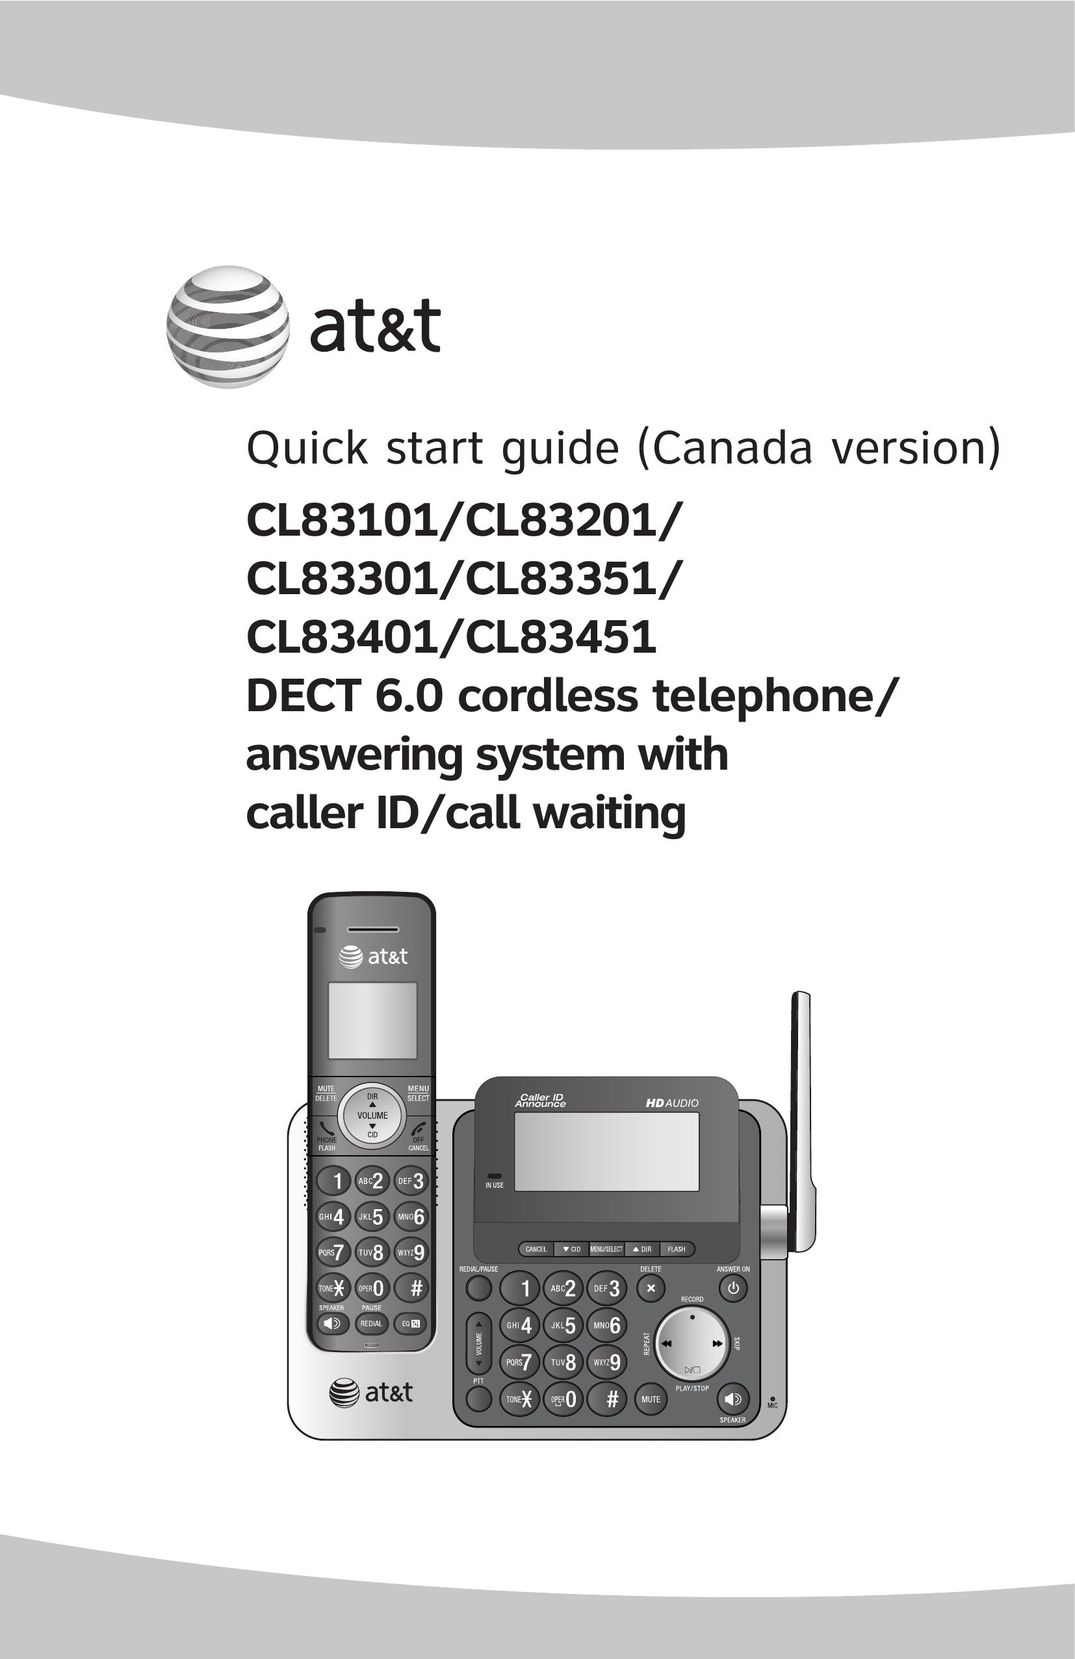 A & T International CL83451 Cordless Telephone User Manual